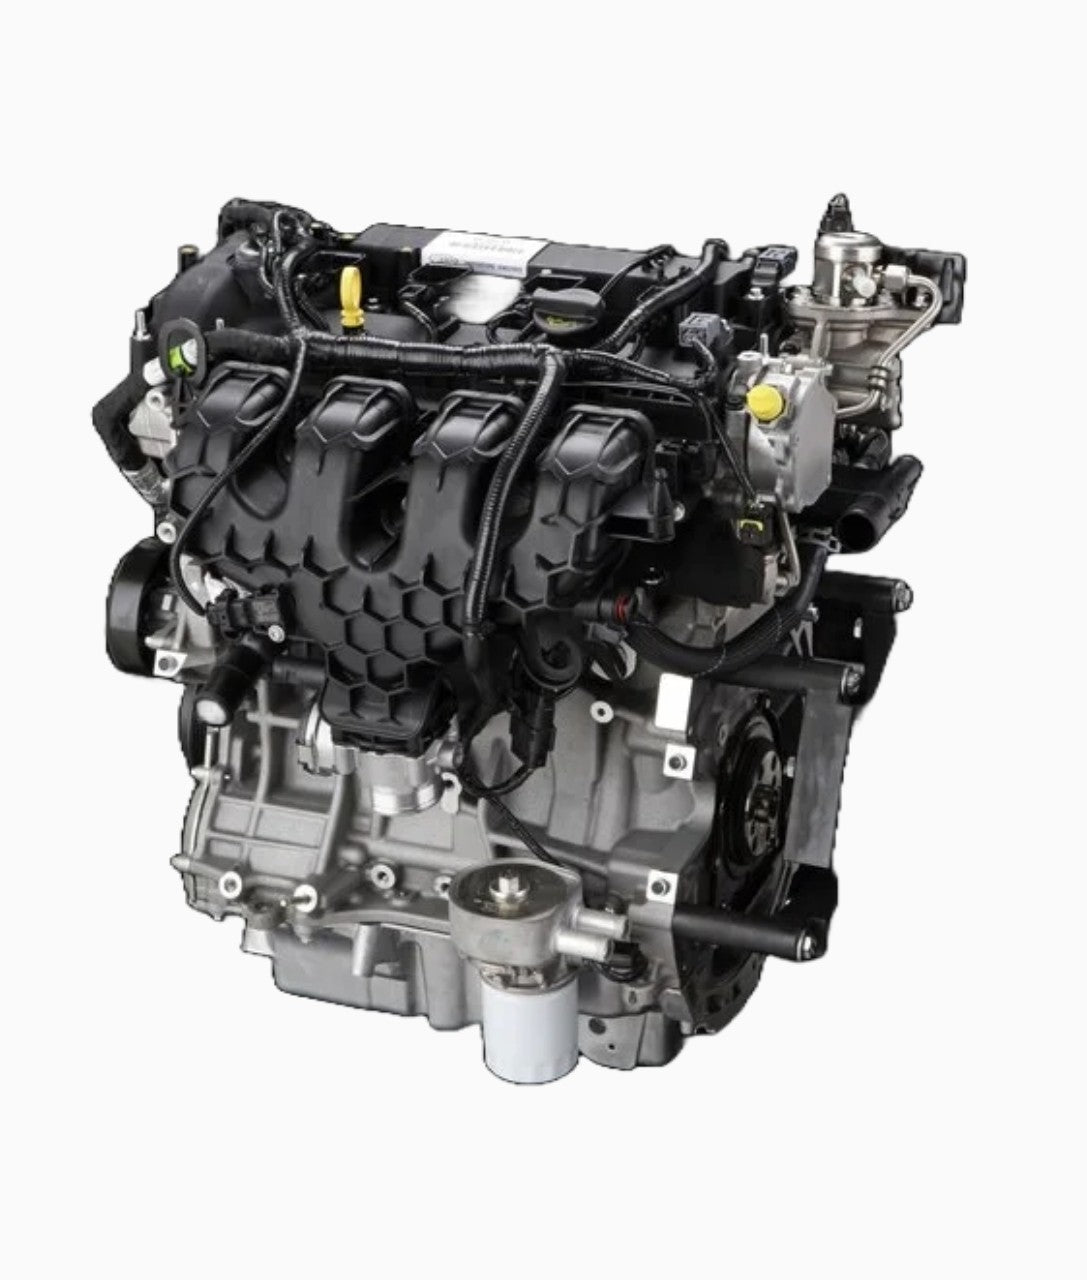 Ford focus 2.0L EcoBoost engines 2014 to 2019